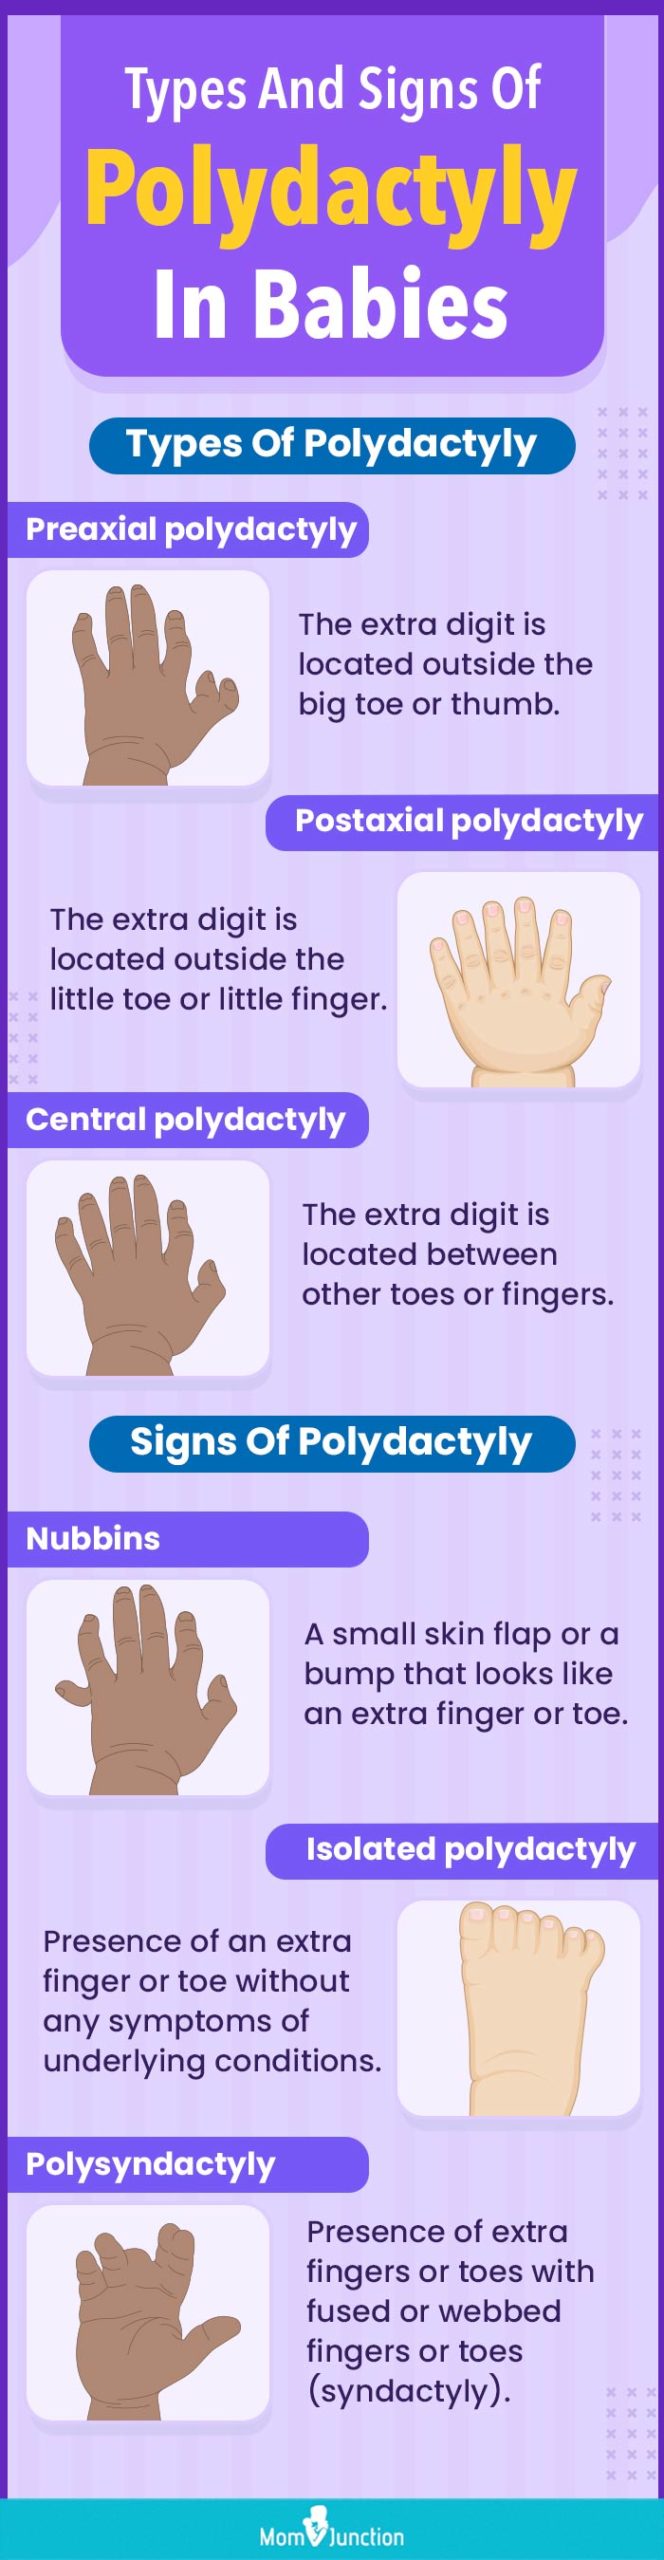 types and signs of polydactyly in babies (infographic)